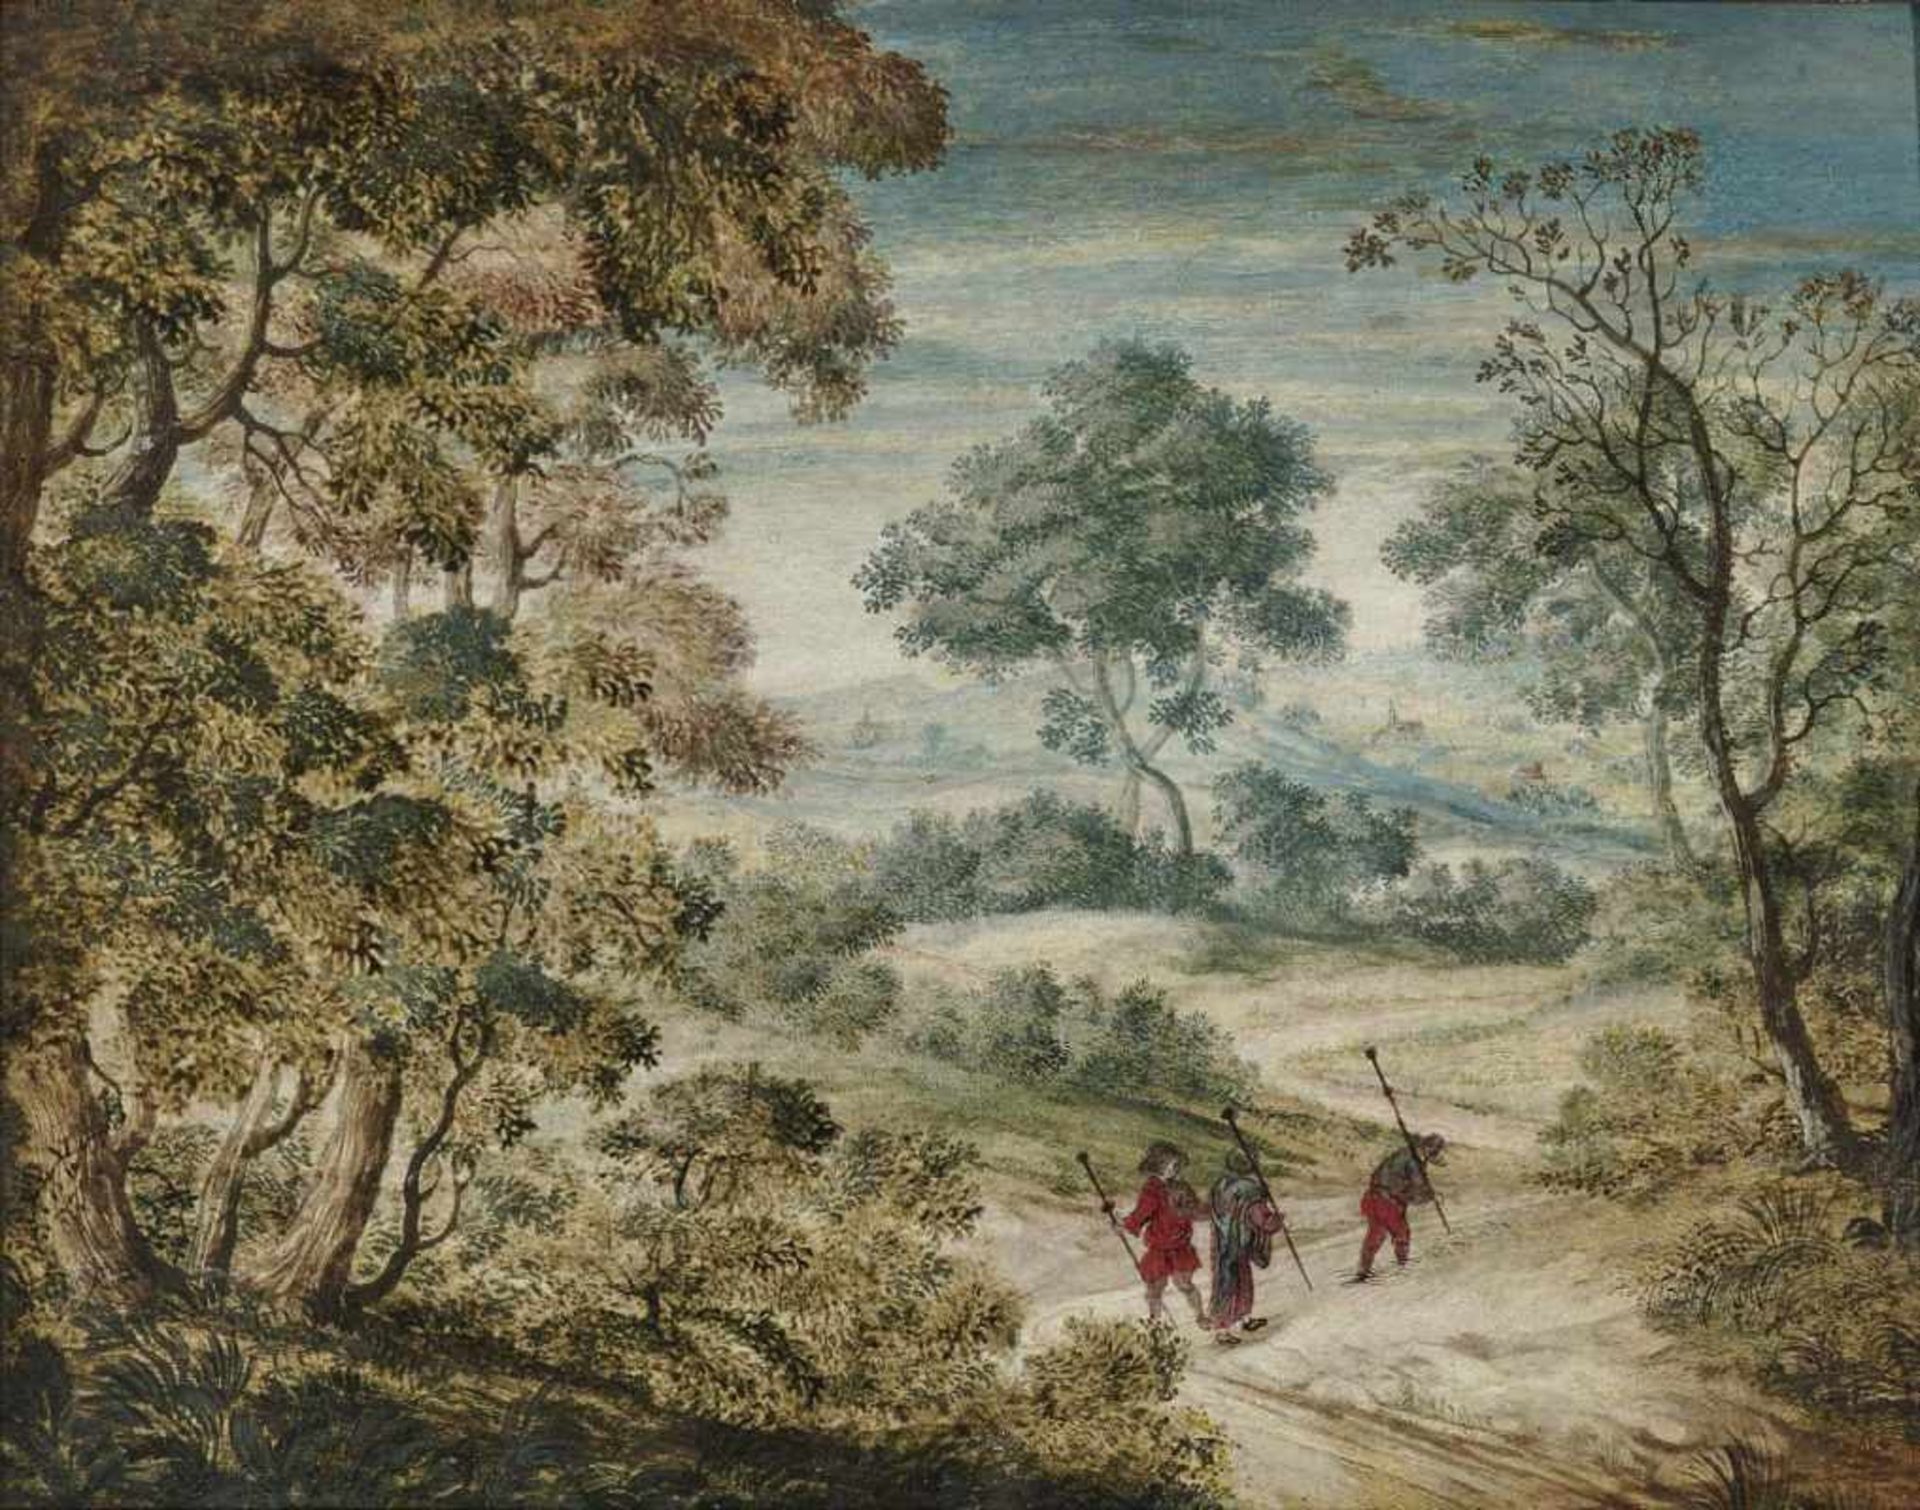 In the style of Coninxloo, Gillis vanExtensive Woodland Landscape with Travellers Gouache on